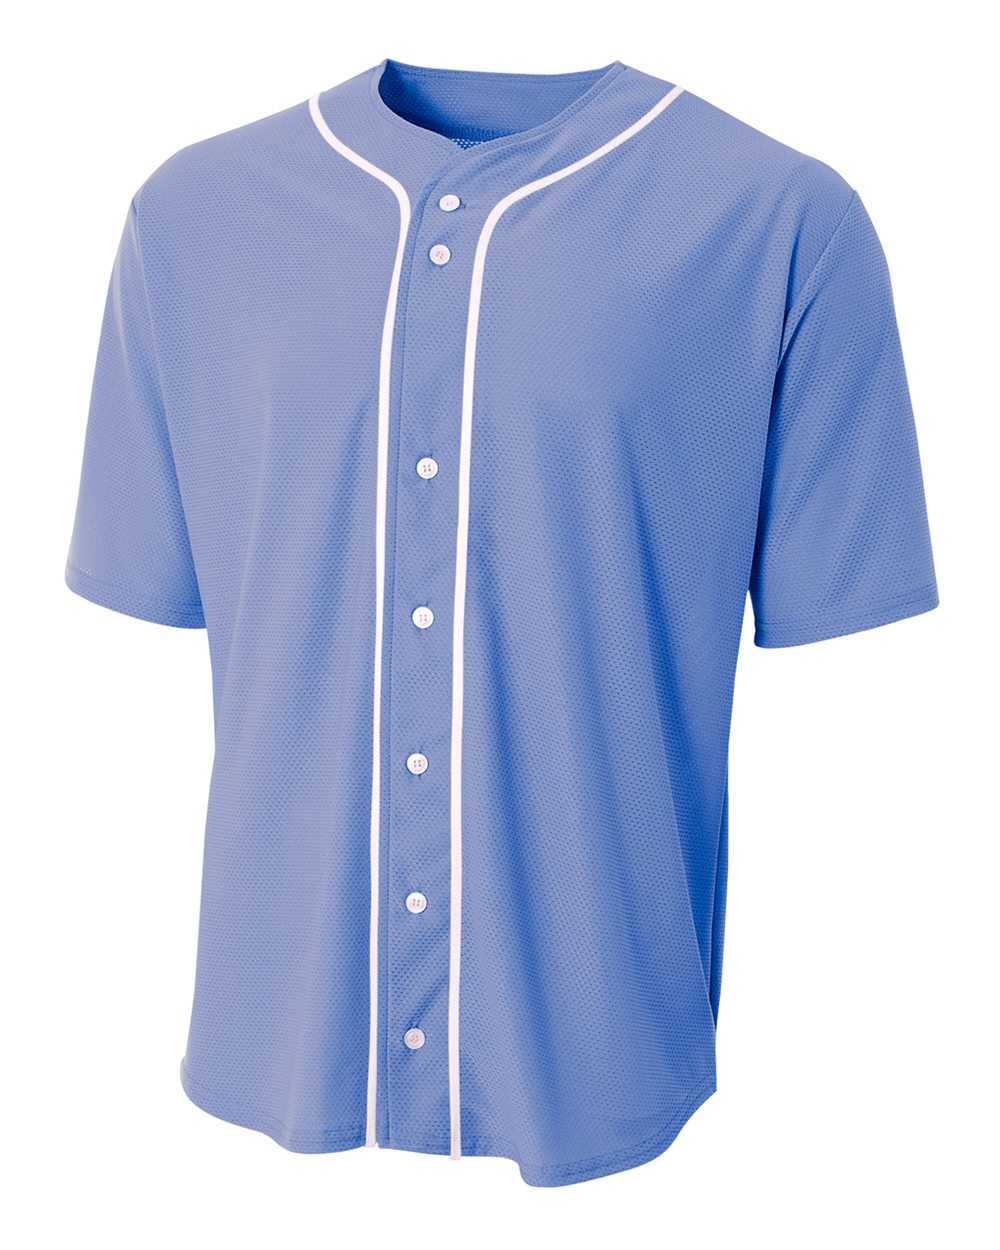 A4 NB4184 Youth Full Button Stretch Mesh Baseball Jersey - Light Blue White - HIT a Double